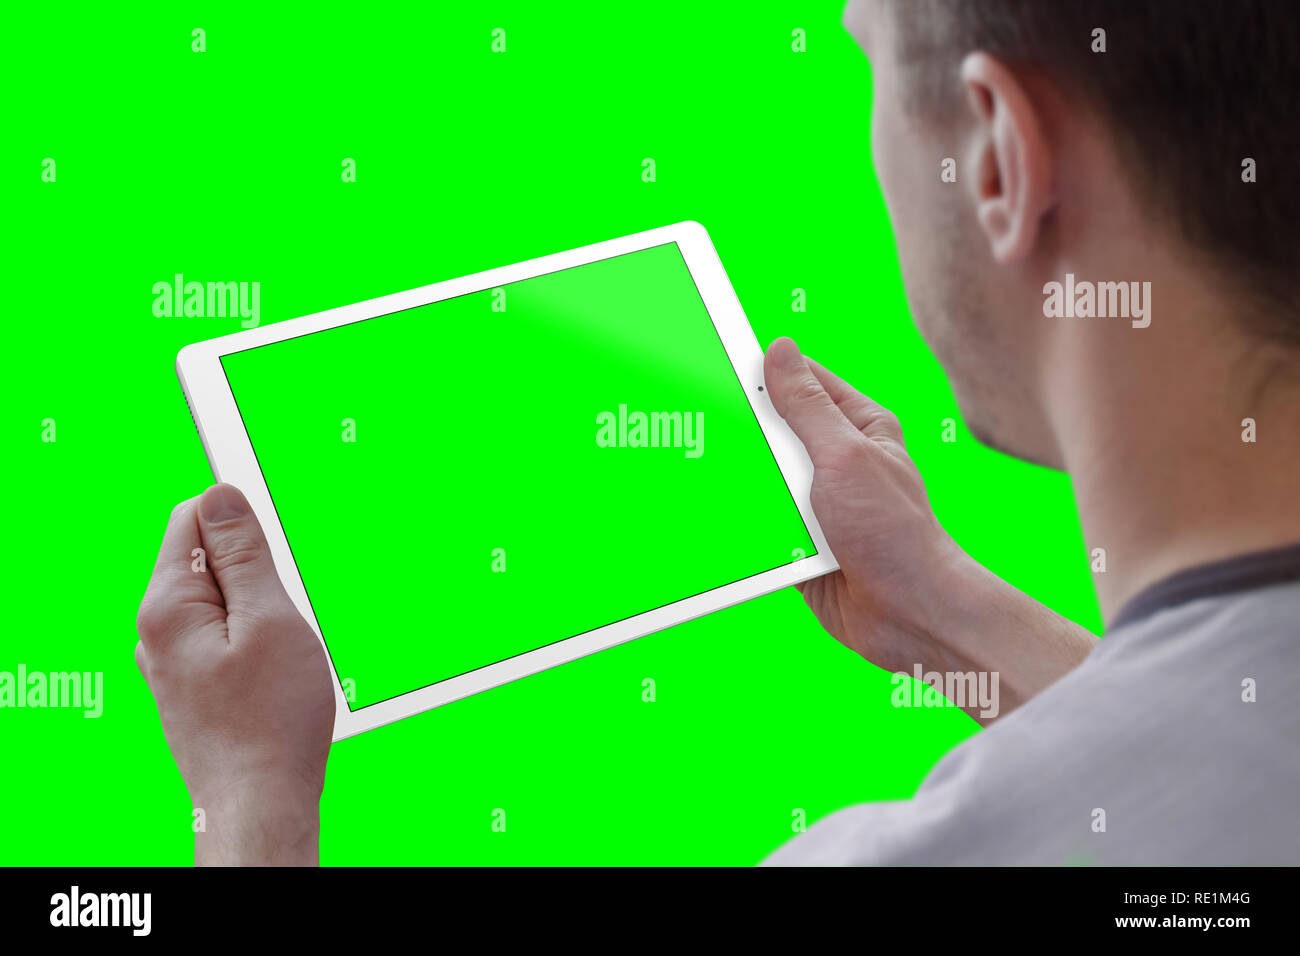 Man holding tablet in horizontal position. View over the shoulder. Isolated screen for mockup, and background in green for video editors. Stock Photo